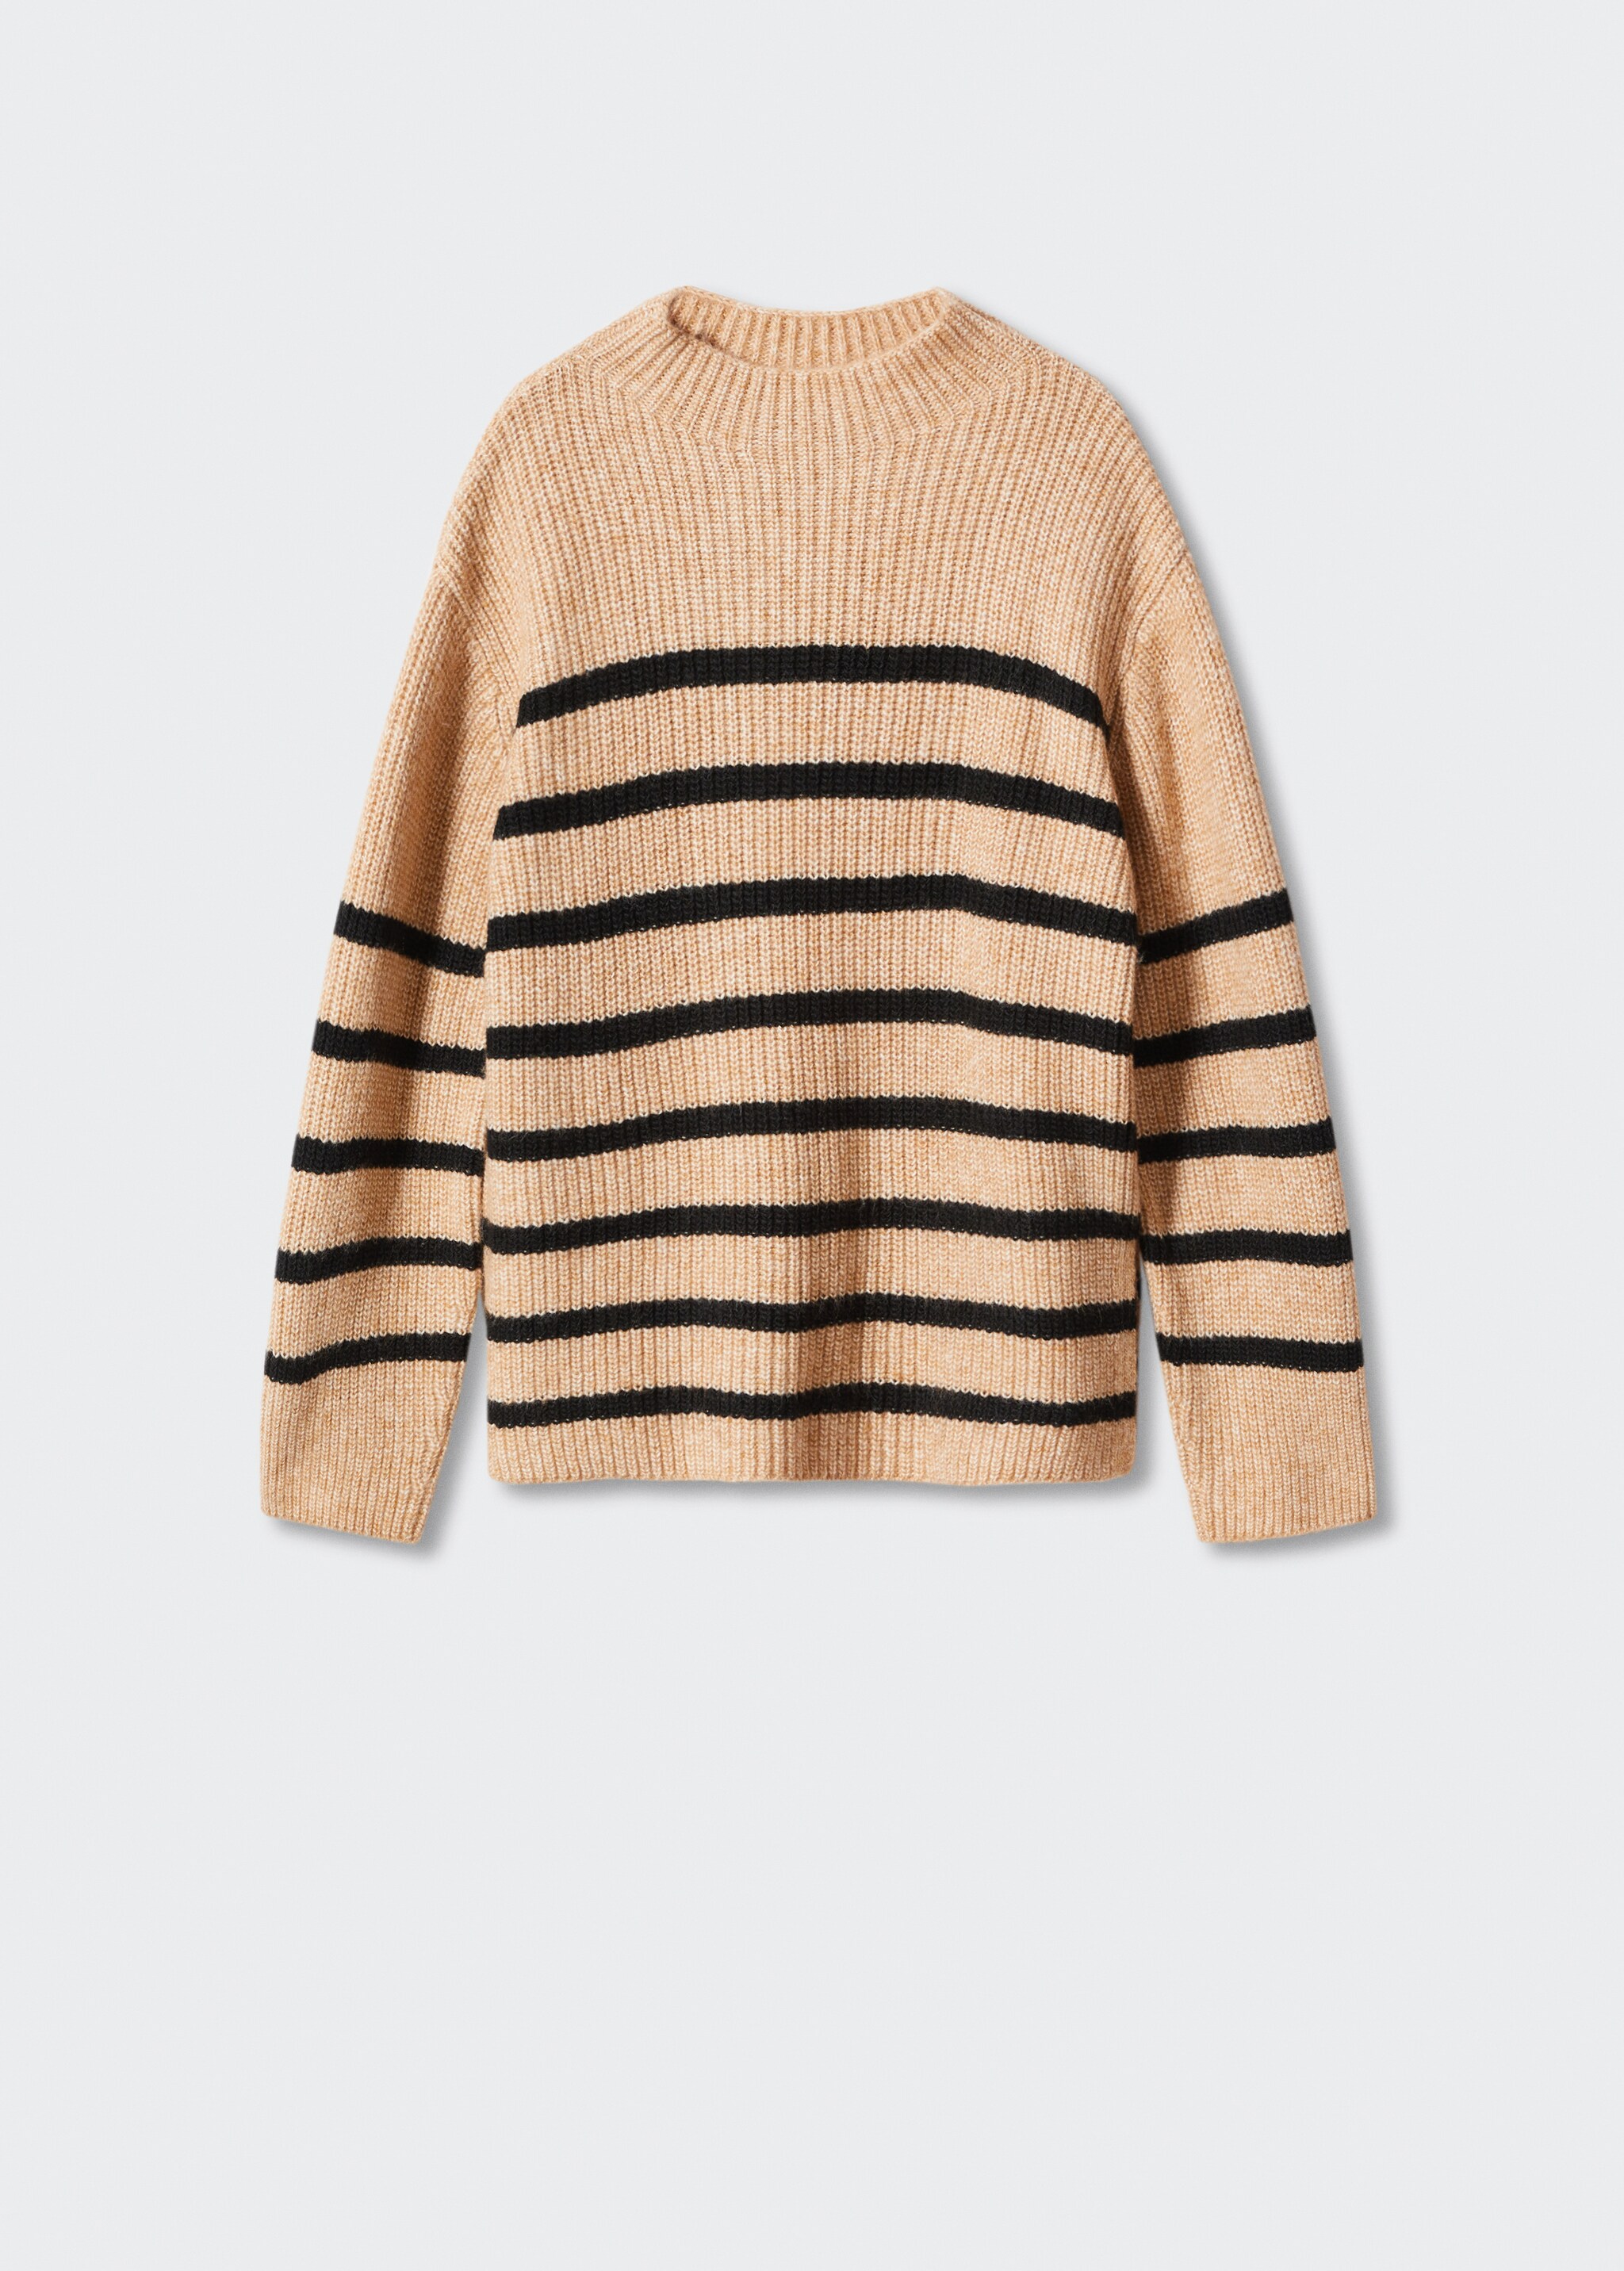 Striped knit sweater - Article without model